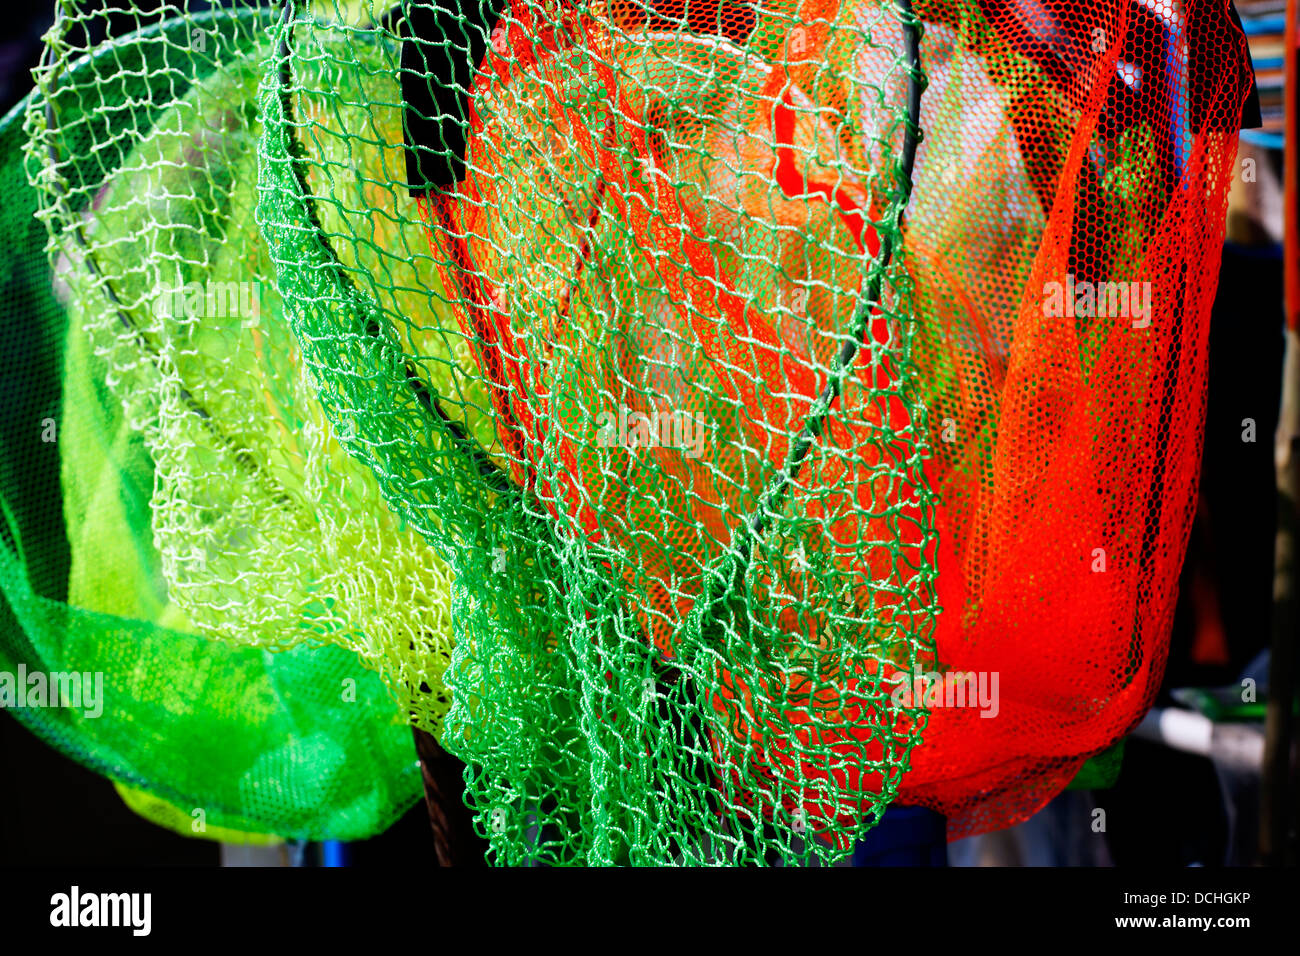 Children's fishing nets, Cancale, Brittany, Northern France, Europe Stock Photo